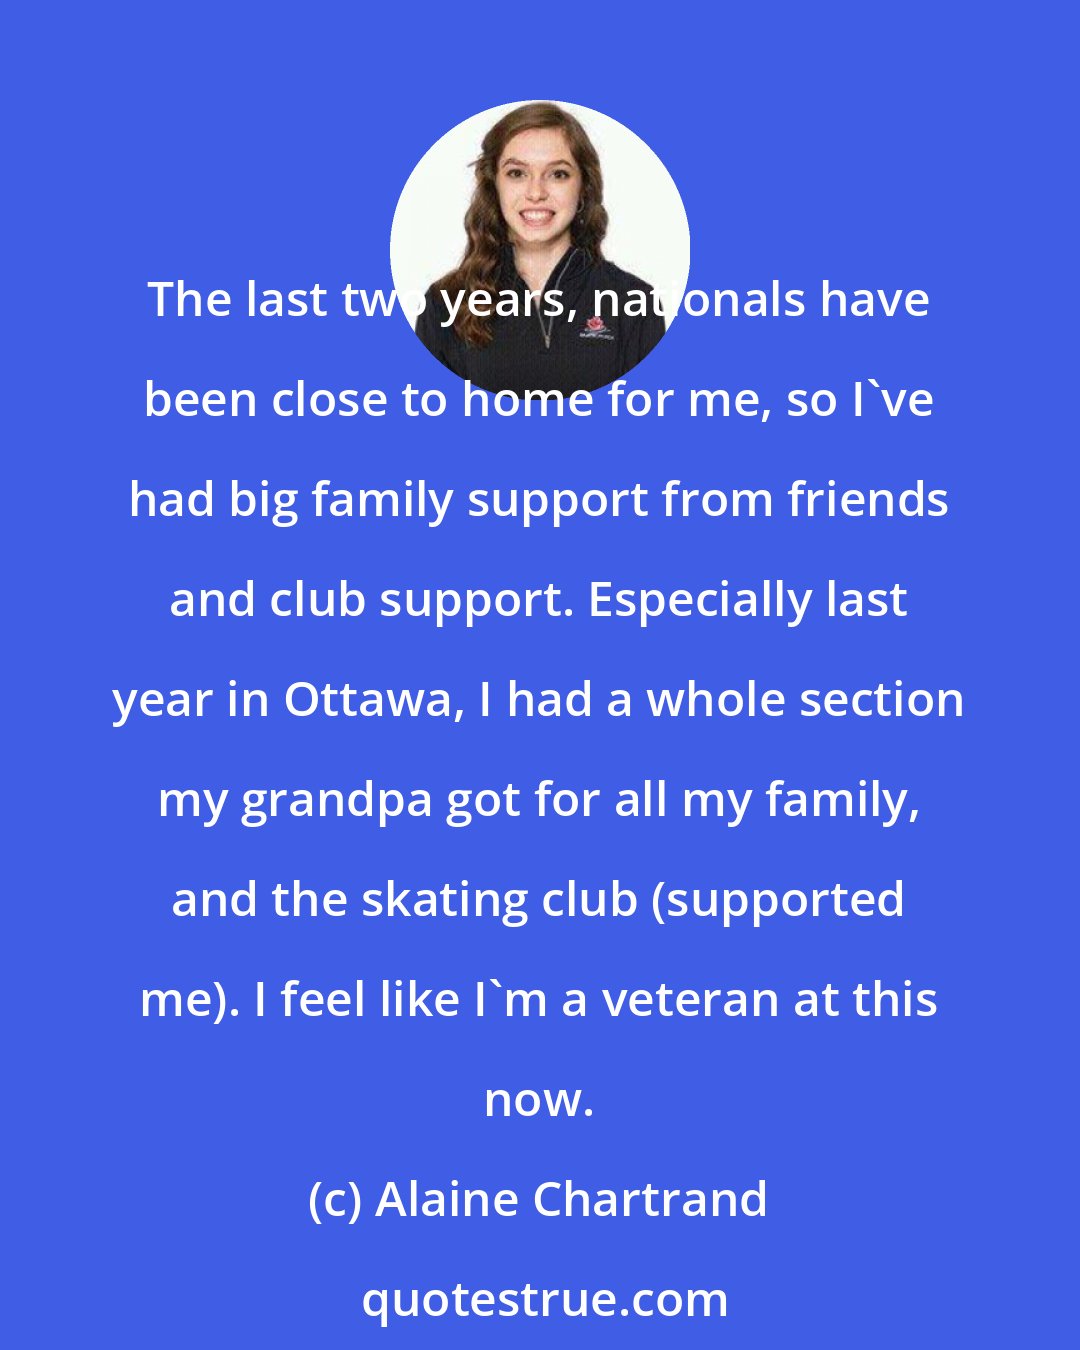 Alaine Chartrand: The last two years, nationals have been close to home for me, so I've had big family support from friends and club support. Especially last year in Ottawa, I had a whole section my grandpa got for all my family, and the skating club (supported me). I feel like I'm a veteran at this now.